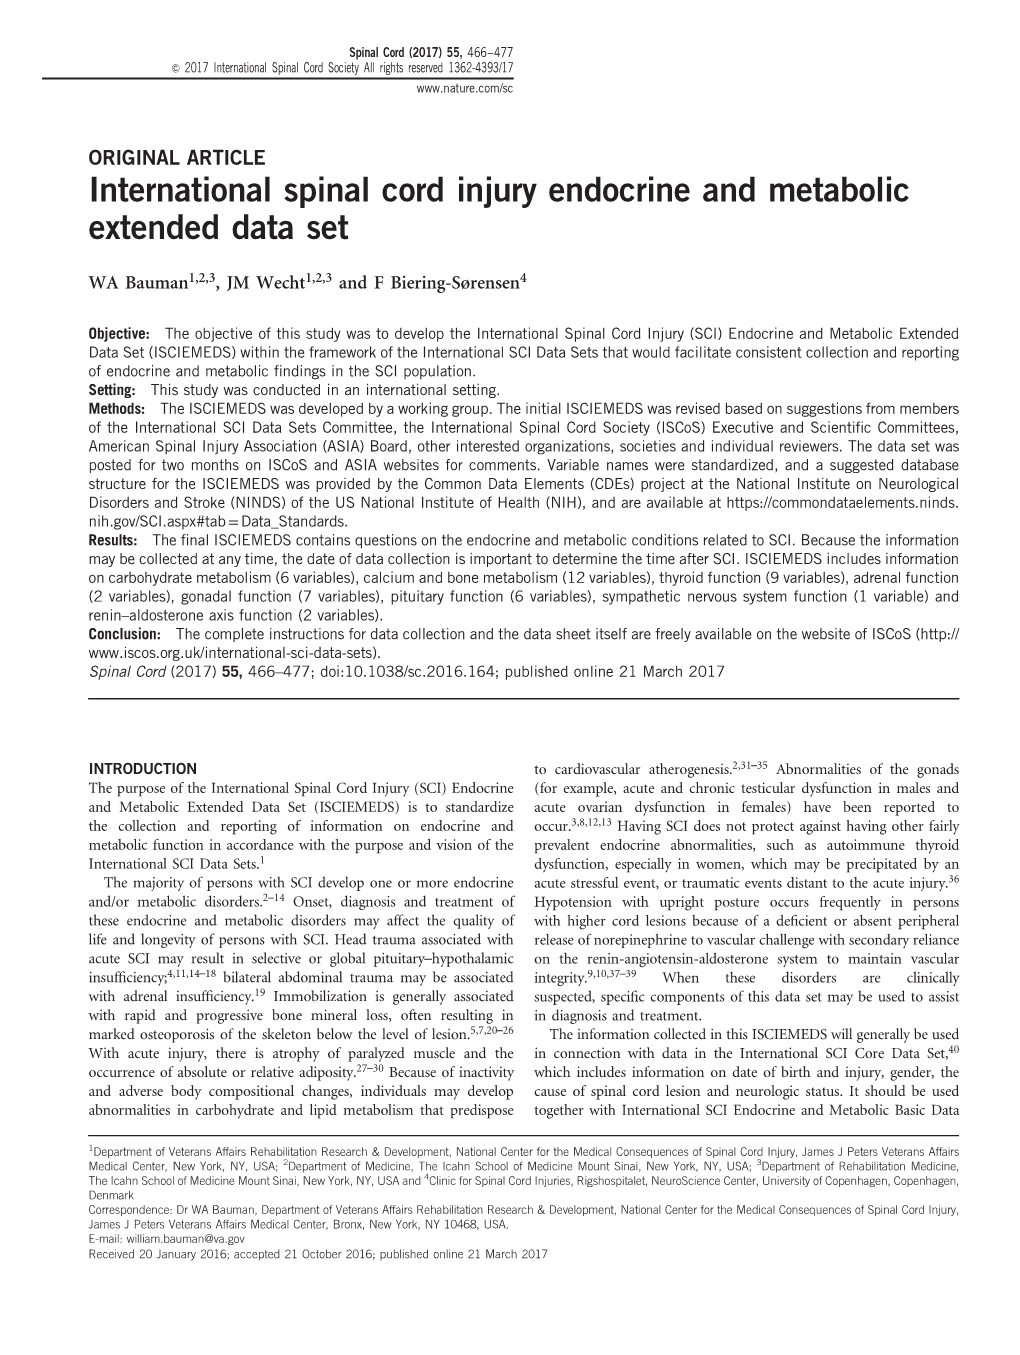 International Spinal Cord Injury Endocrine and Metabolic Extended Data Set